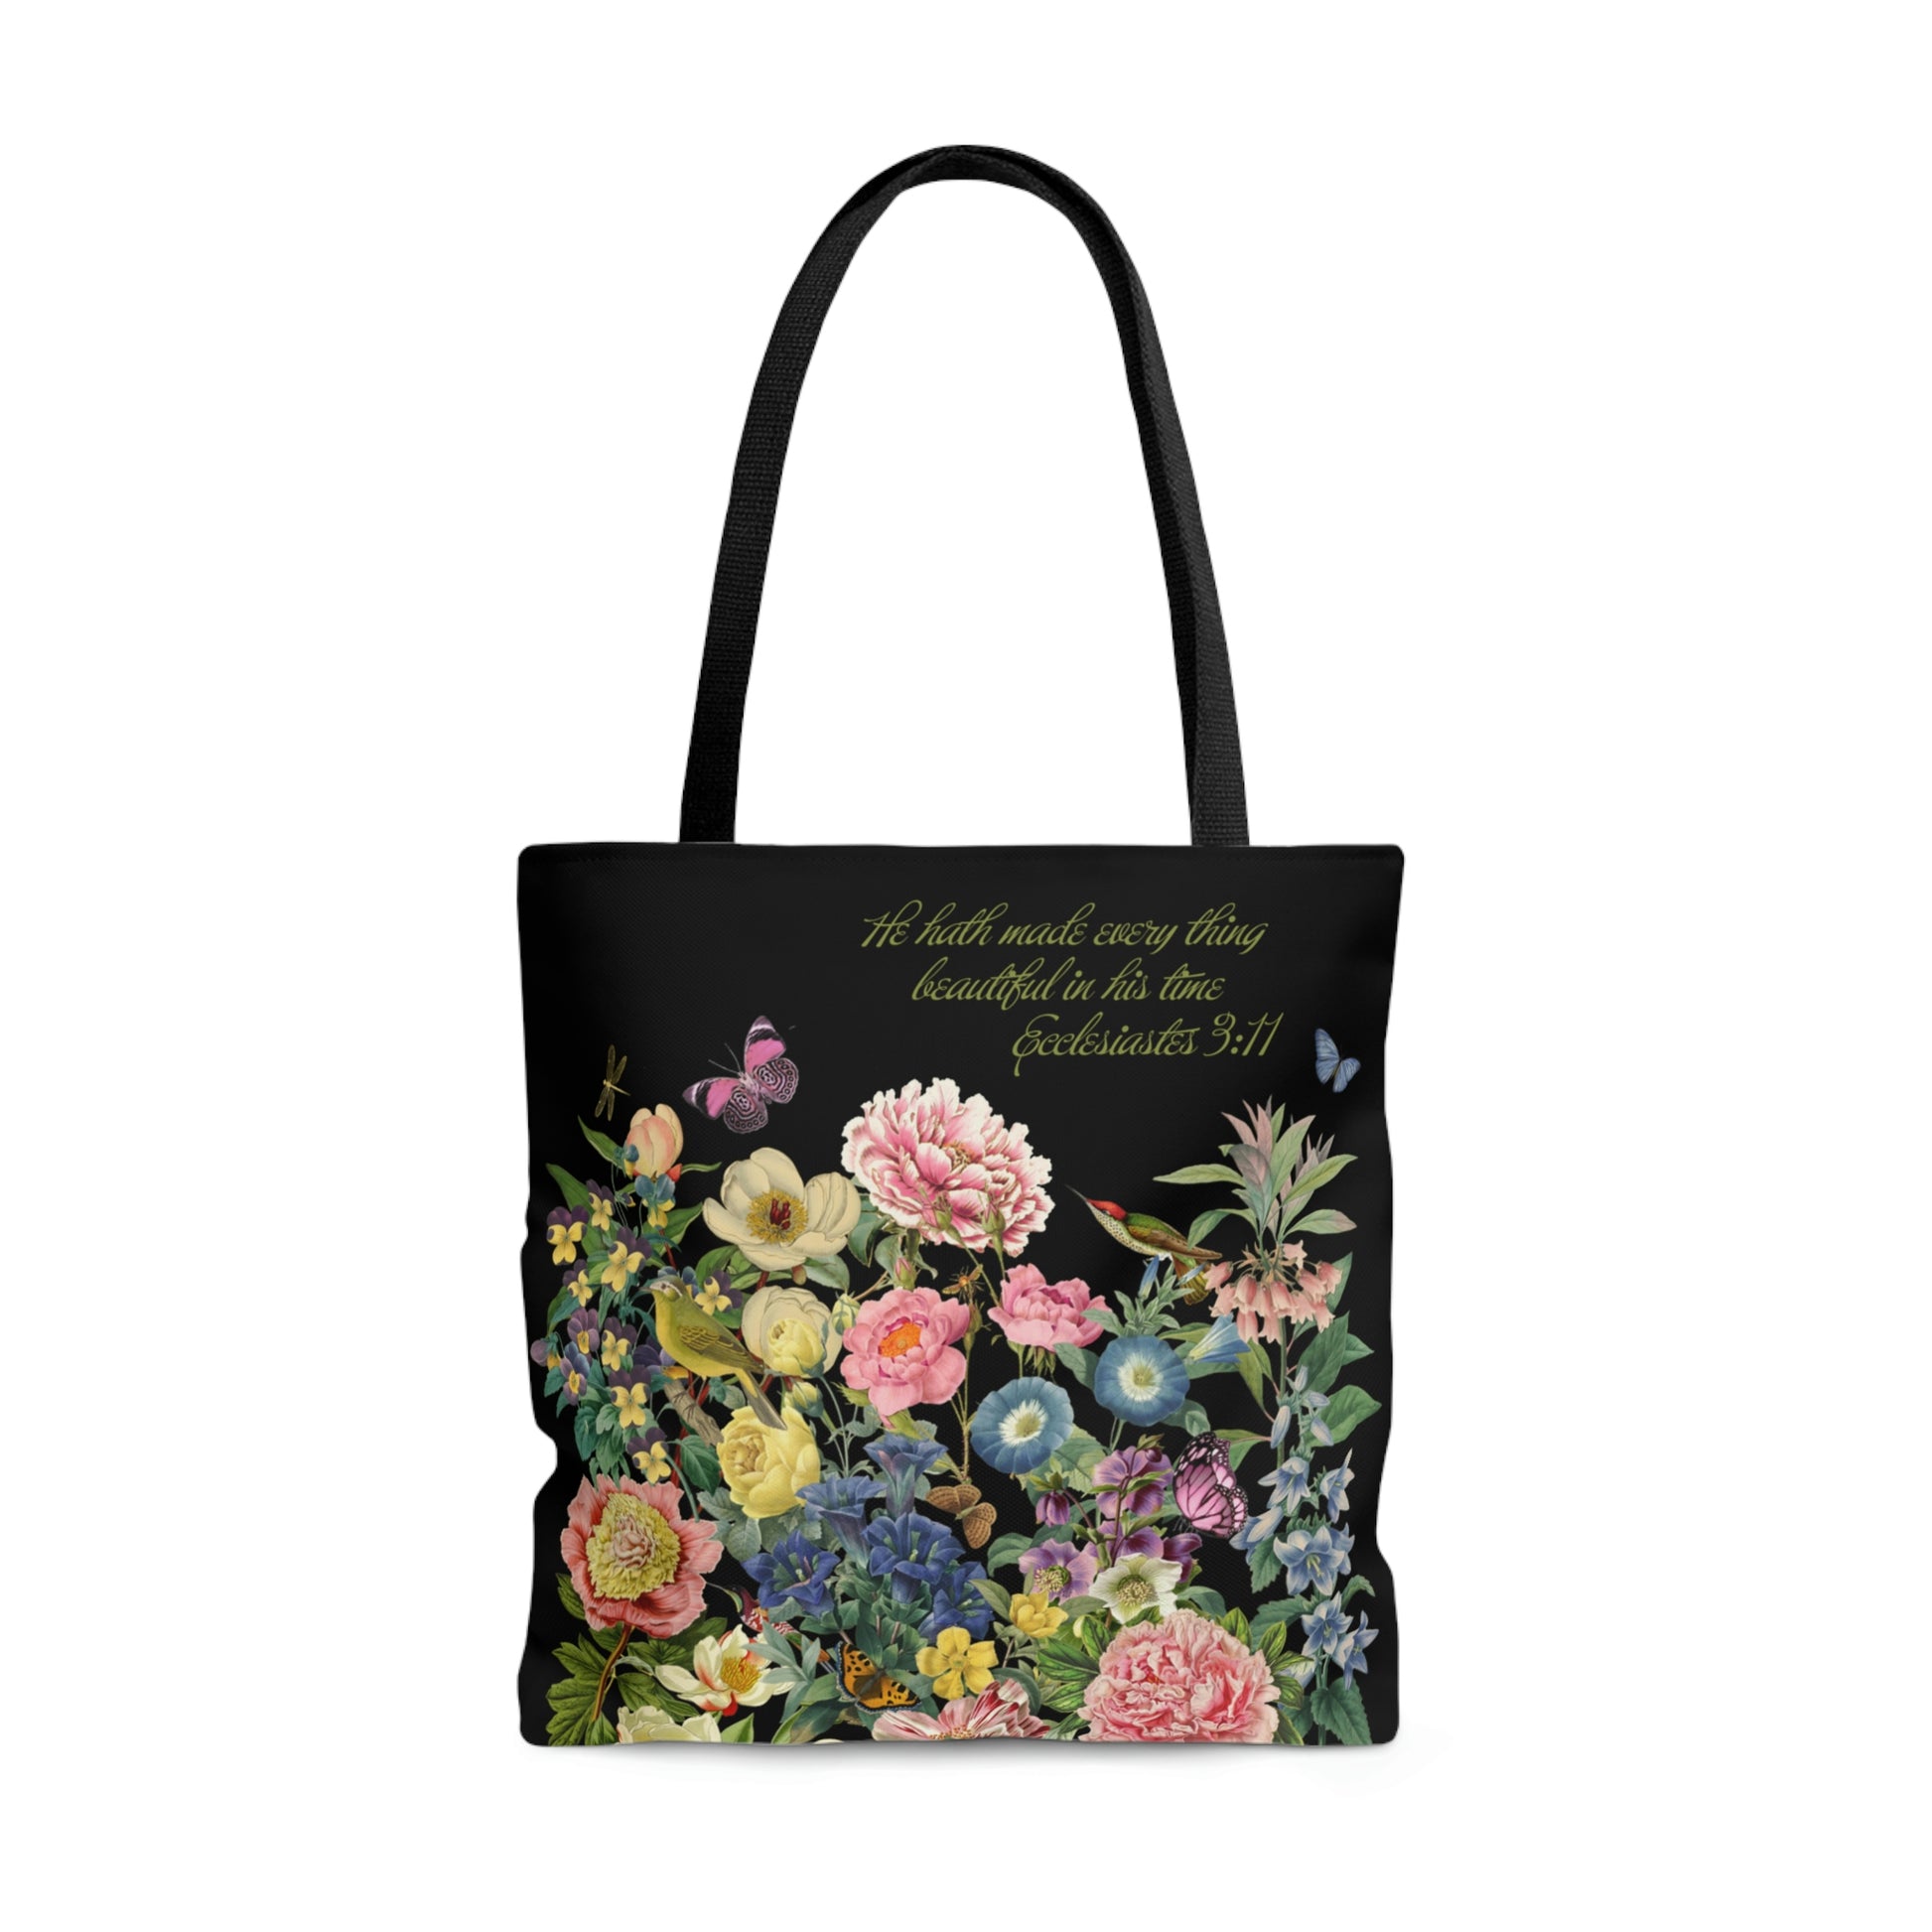 Floral Tote Bag "He hath made every thing beautiful in his time" Ecclesiastes 3:11